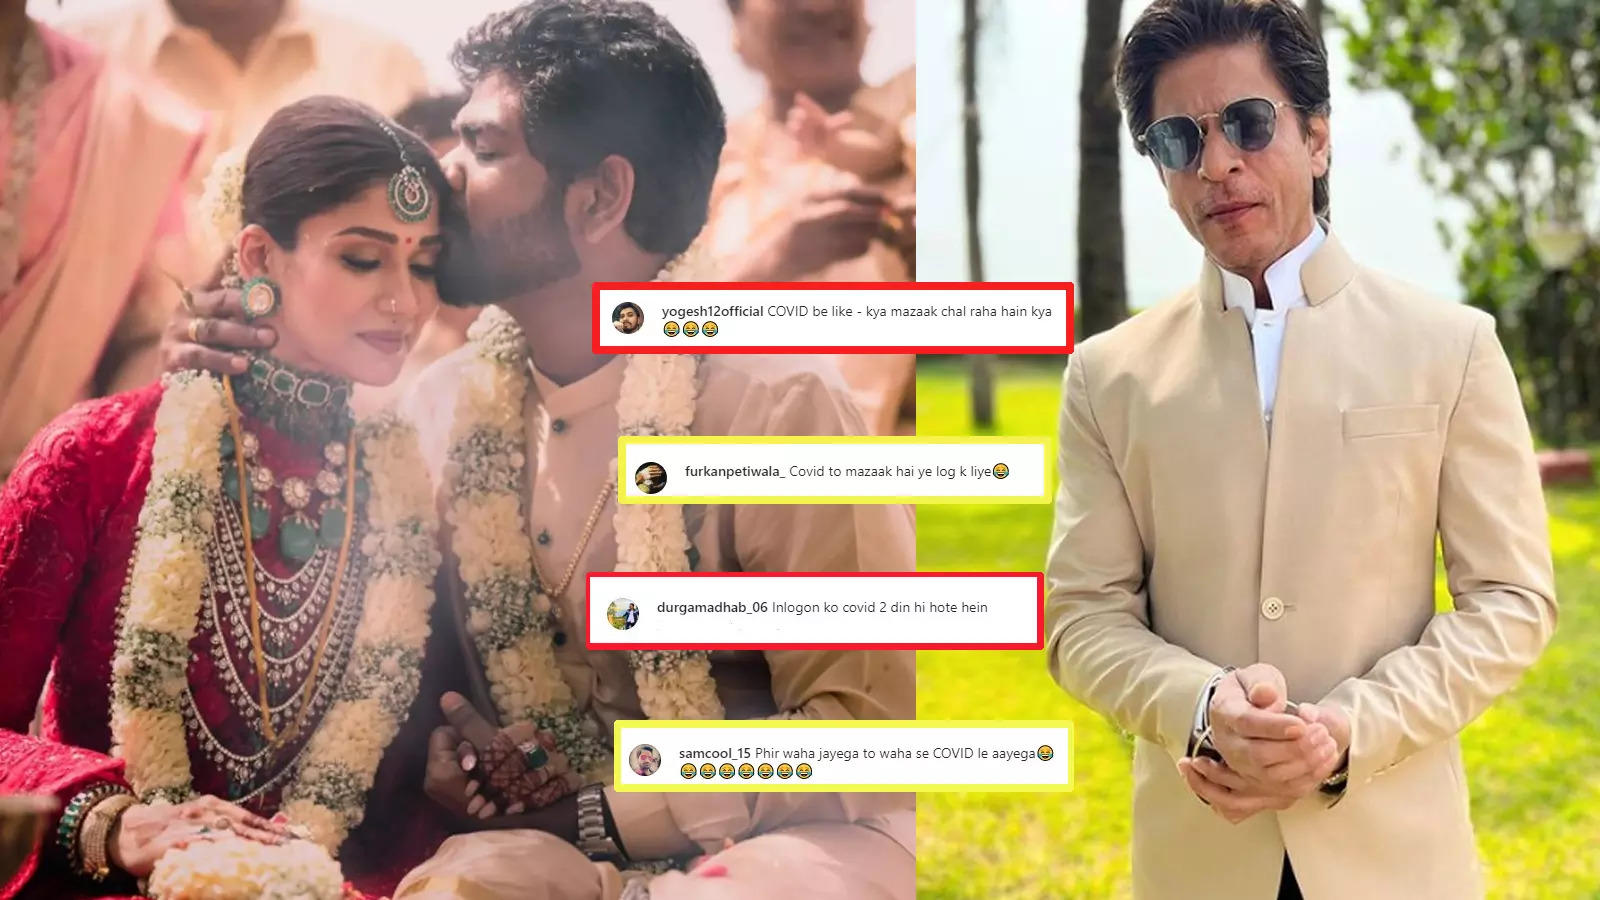 Shah Rukh Khan gets trolled for attending Nayanthara-Vignesh Shivan's  wedding 4 days after testing COVID-19 positive, netizens say 'Inlogon ko  covid 2 din hi hote hain' | Entertainment - Times of India Videos